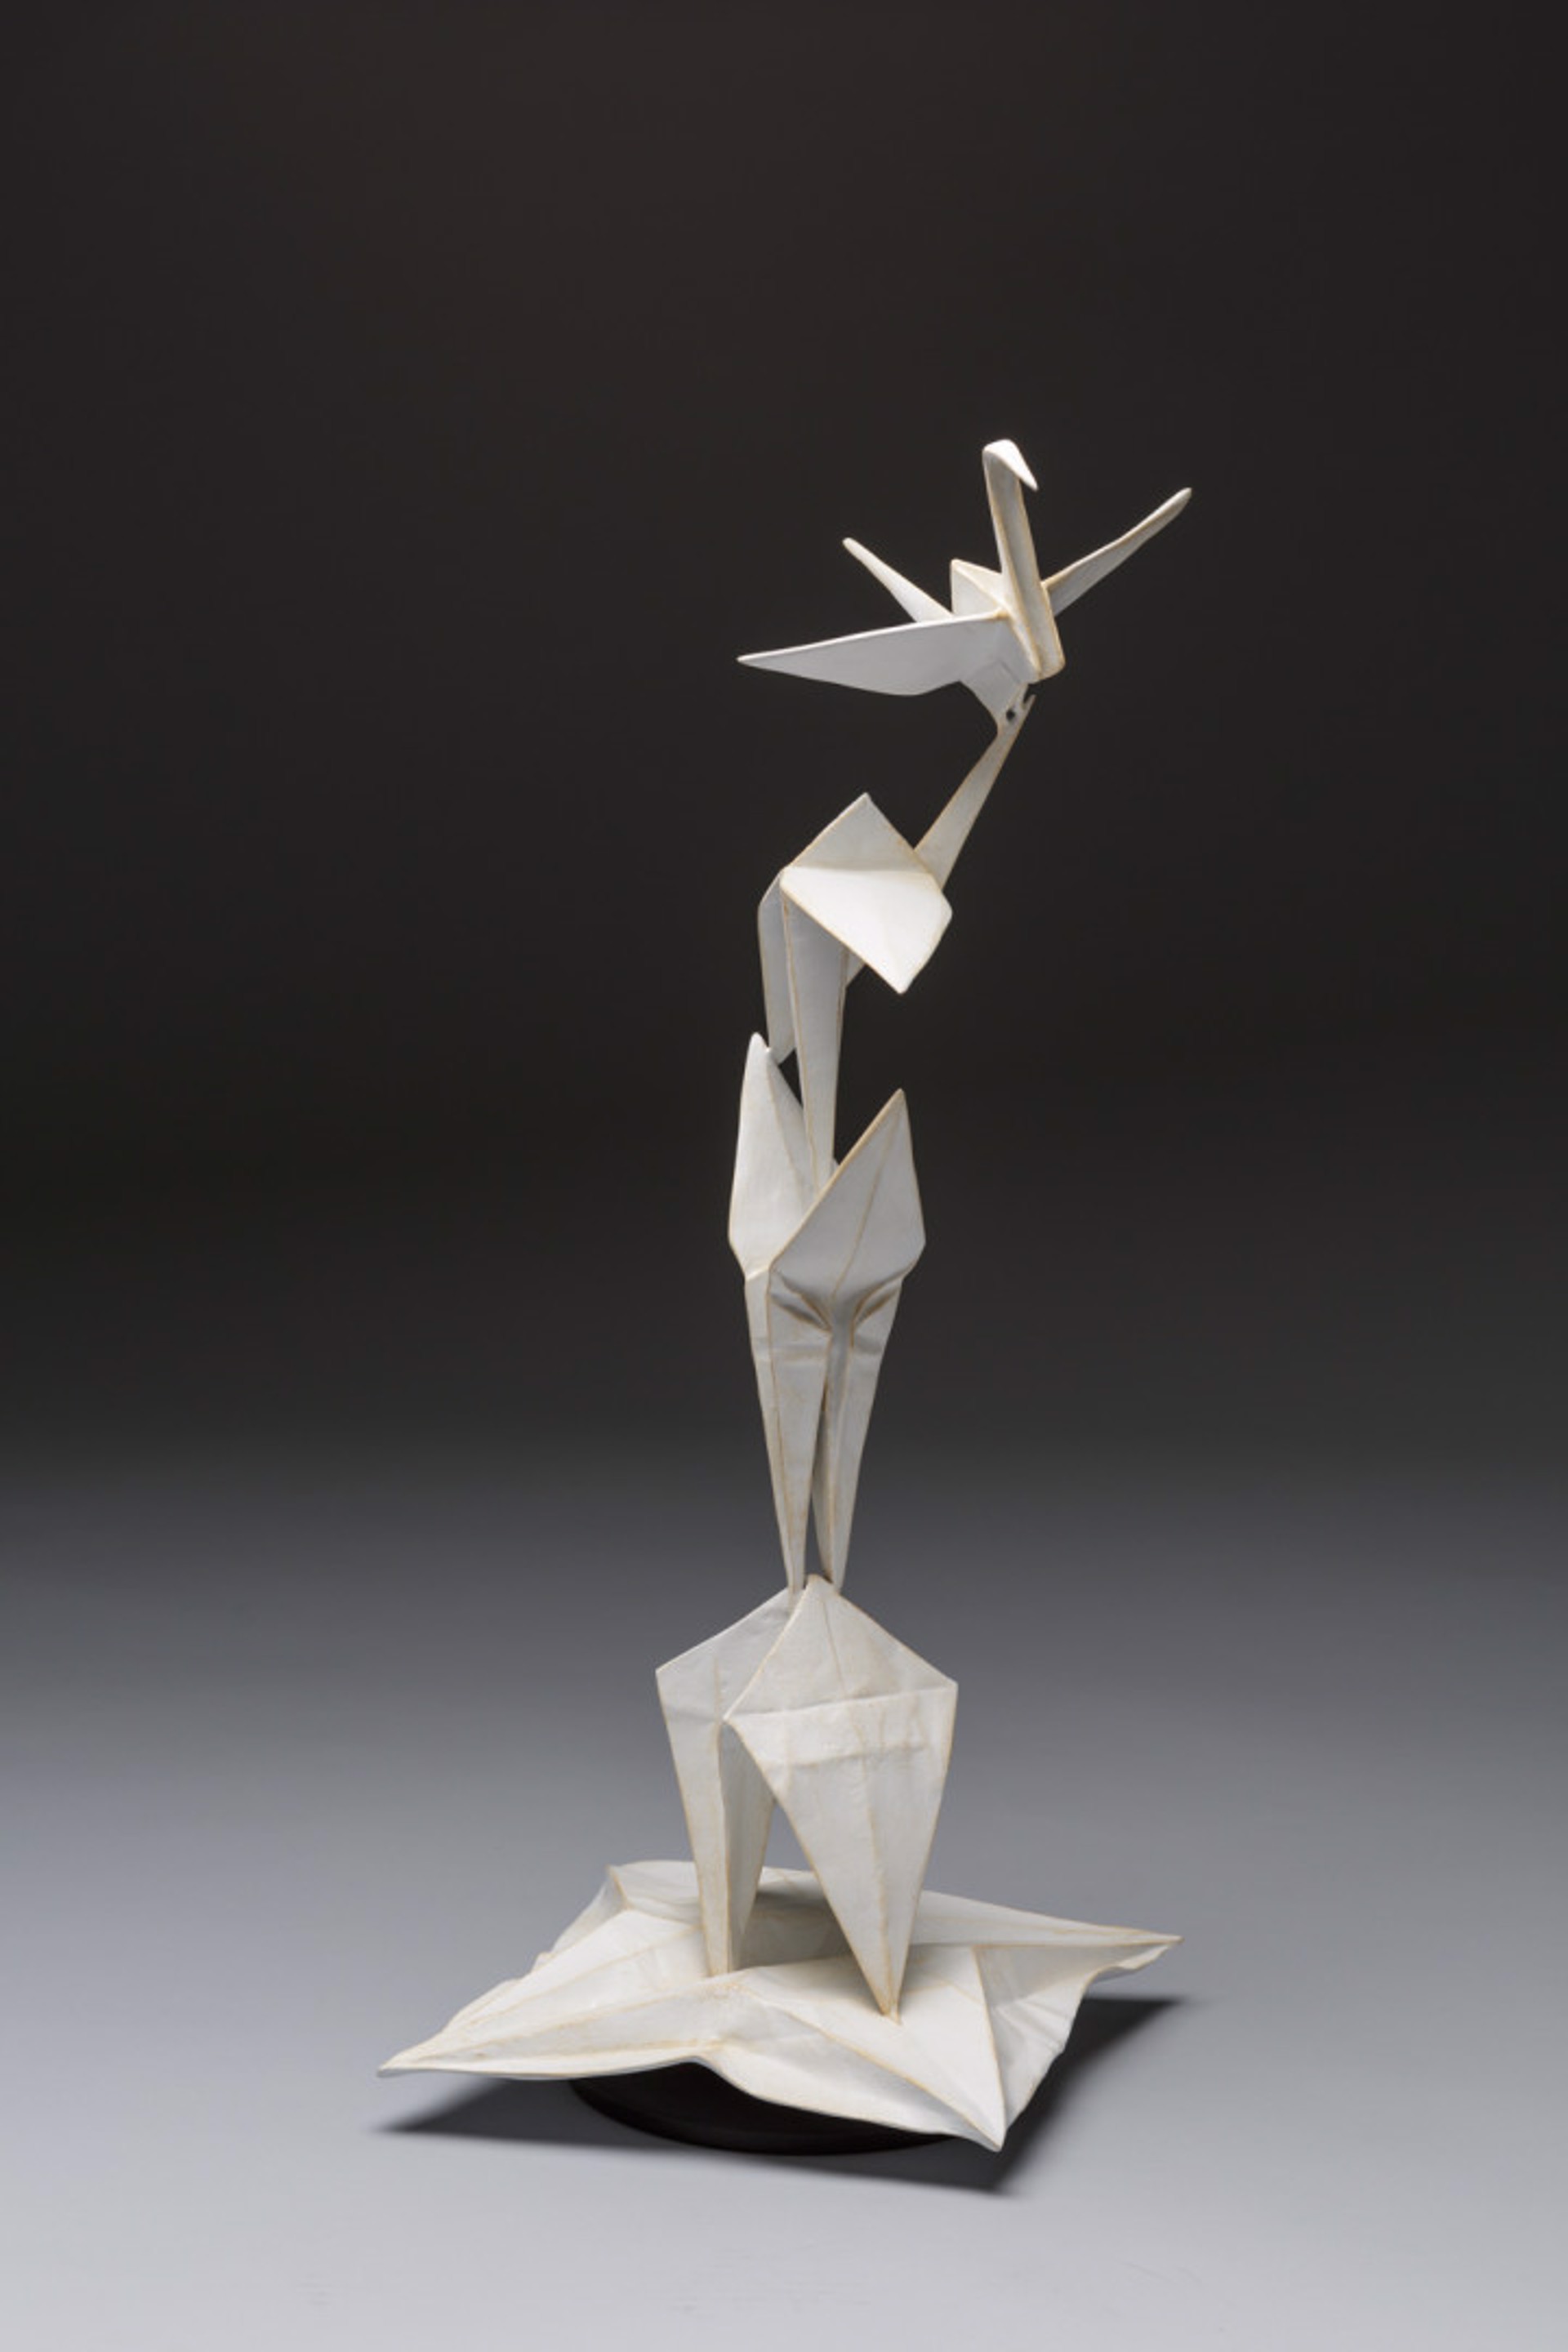 Crane Unfolding (collaboration with Robert Lang) by KEVIN BOX